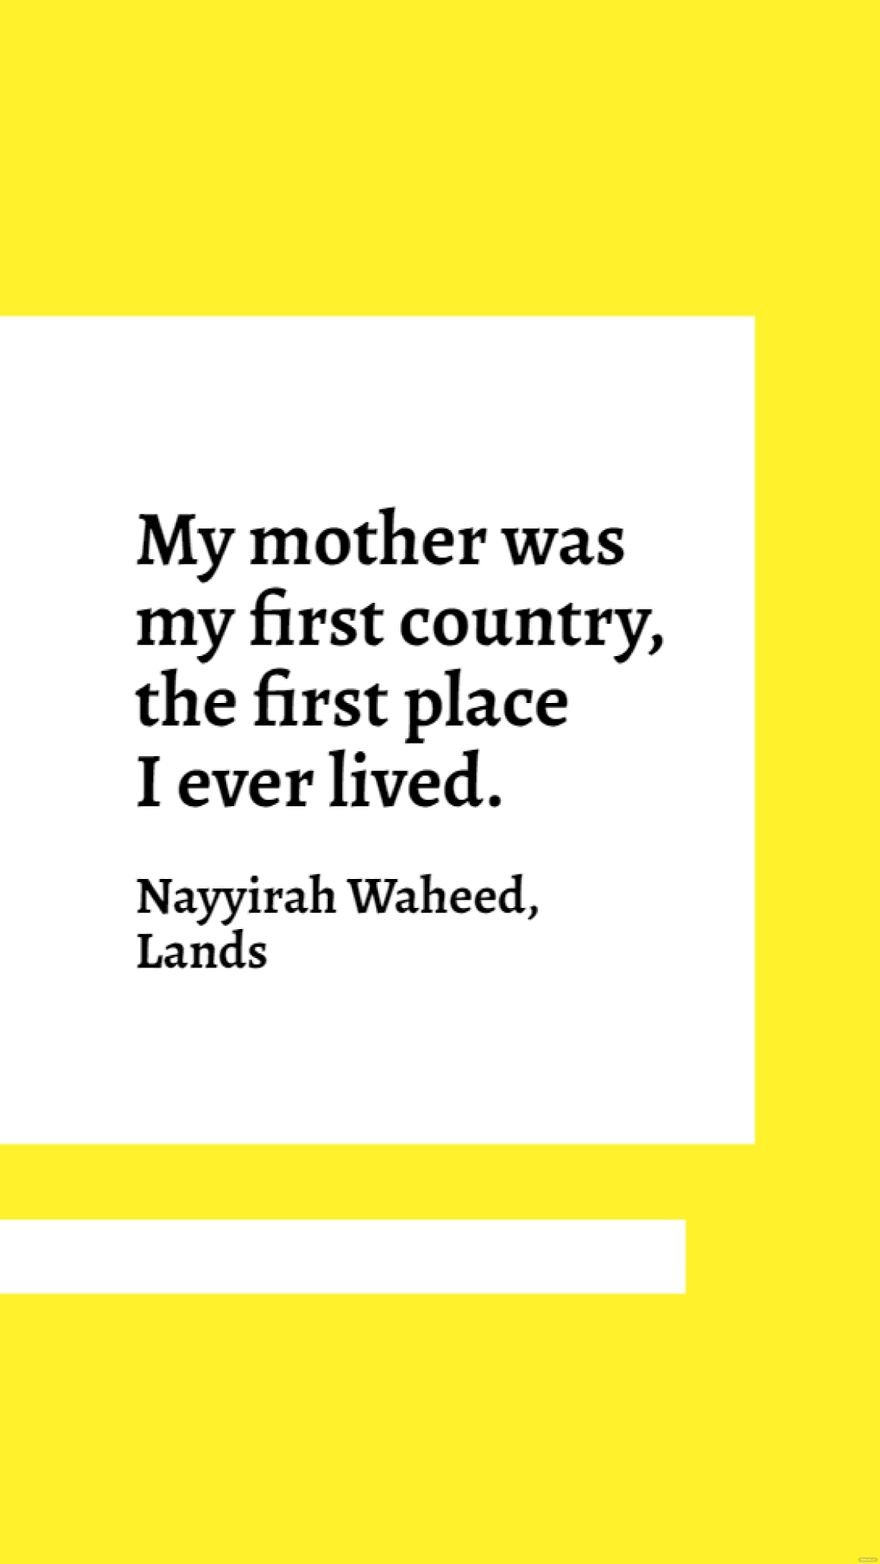 Free Nayyirah Waheed, Lands - My mother was my first country, the first place I ever lived. in JPG